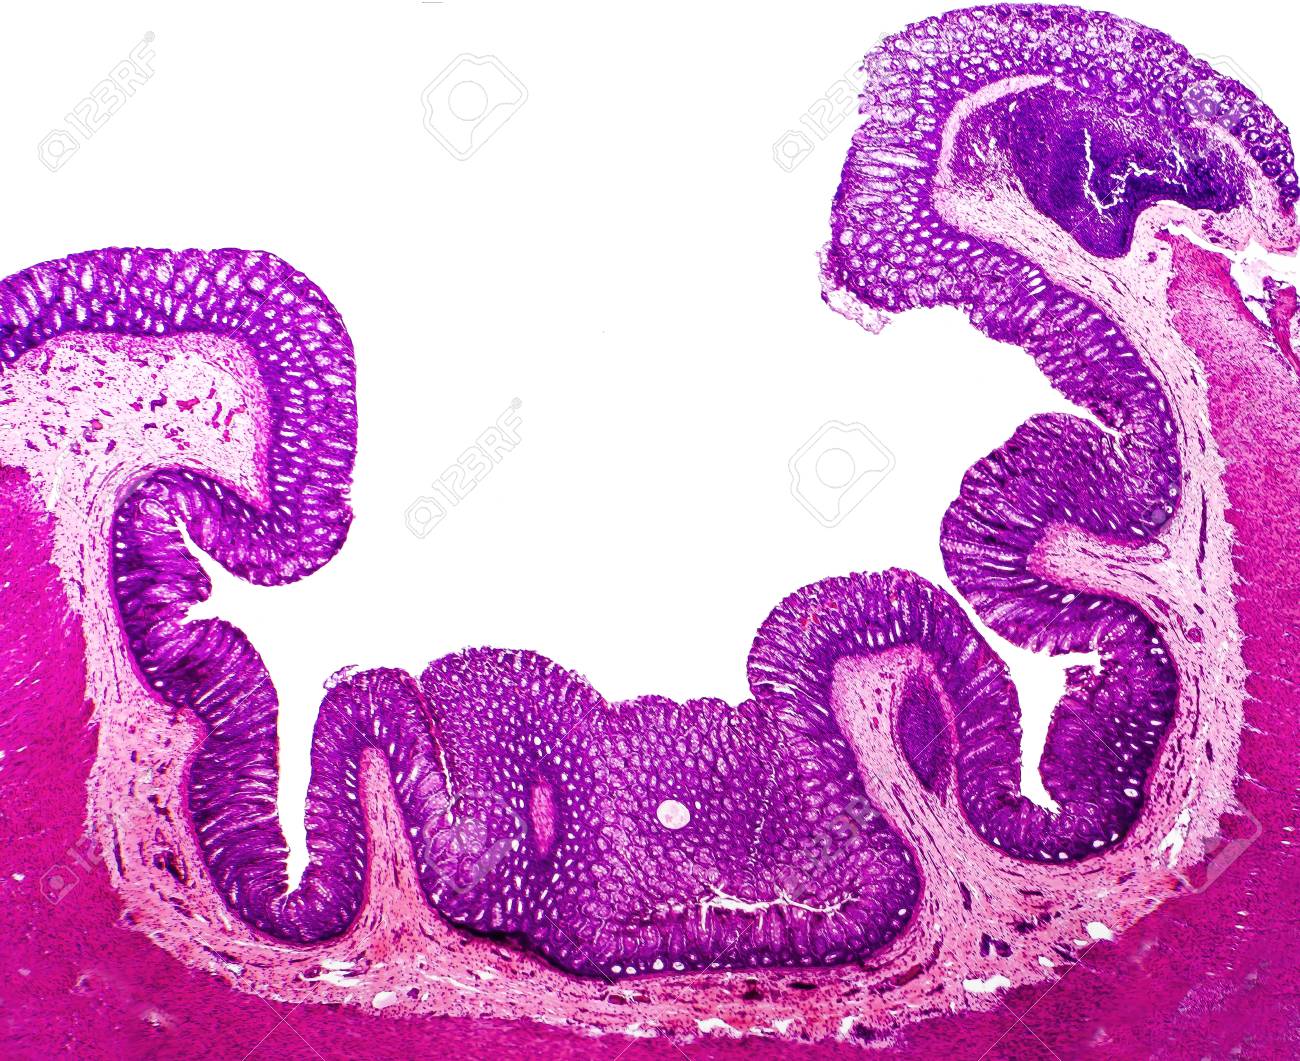 Histology Of Human Appendix Cross Section Micrograph Showing